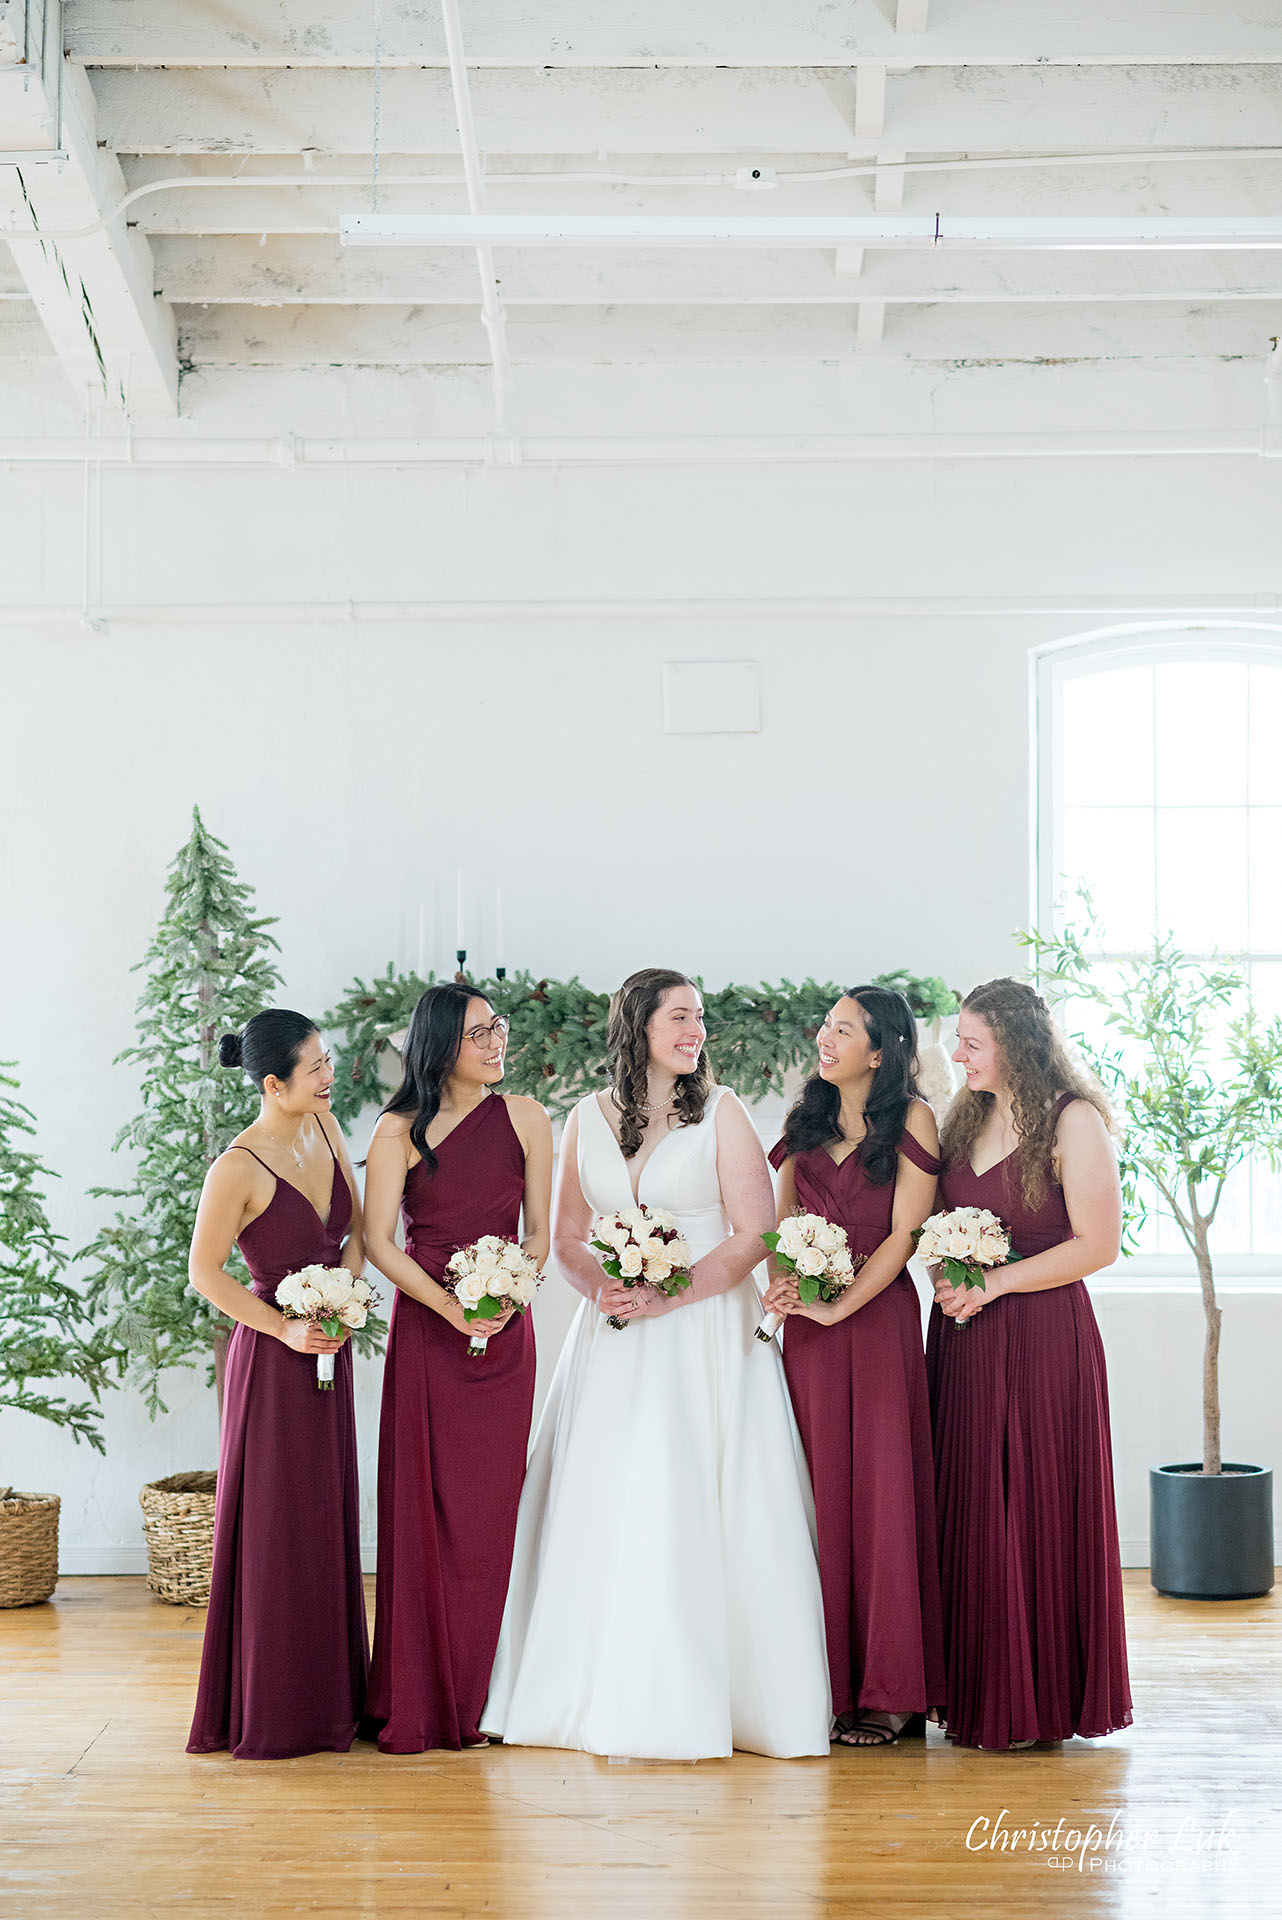 Wedding Party Bridal Bride Bridesmaids Red Dresses Gowns Group Photo Vintage White Loft Studio Kitchener Waterloo Winter Christmas Portrait Natural Candid Photojournalistic Happy